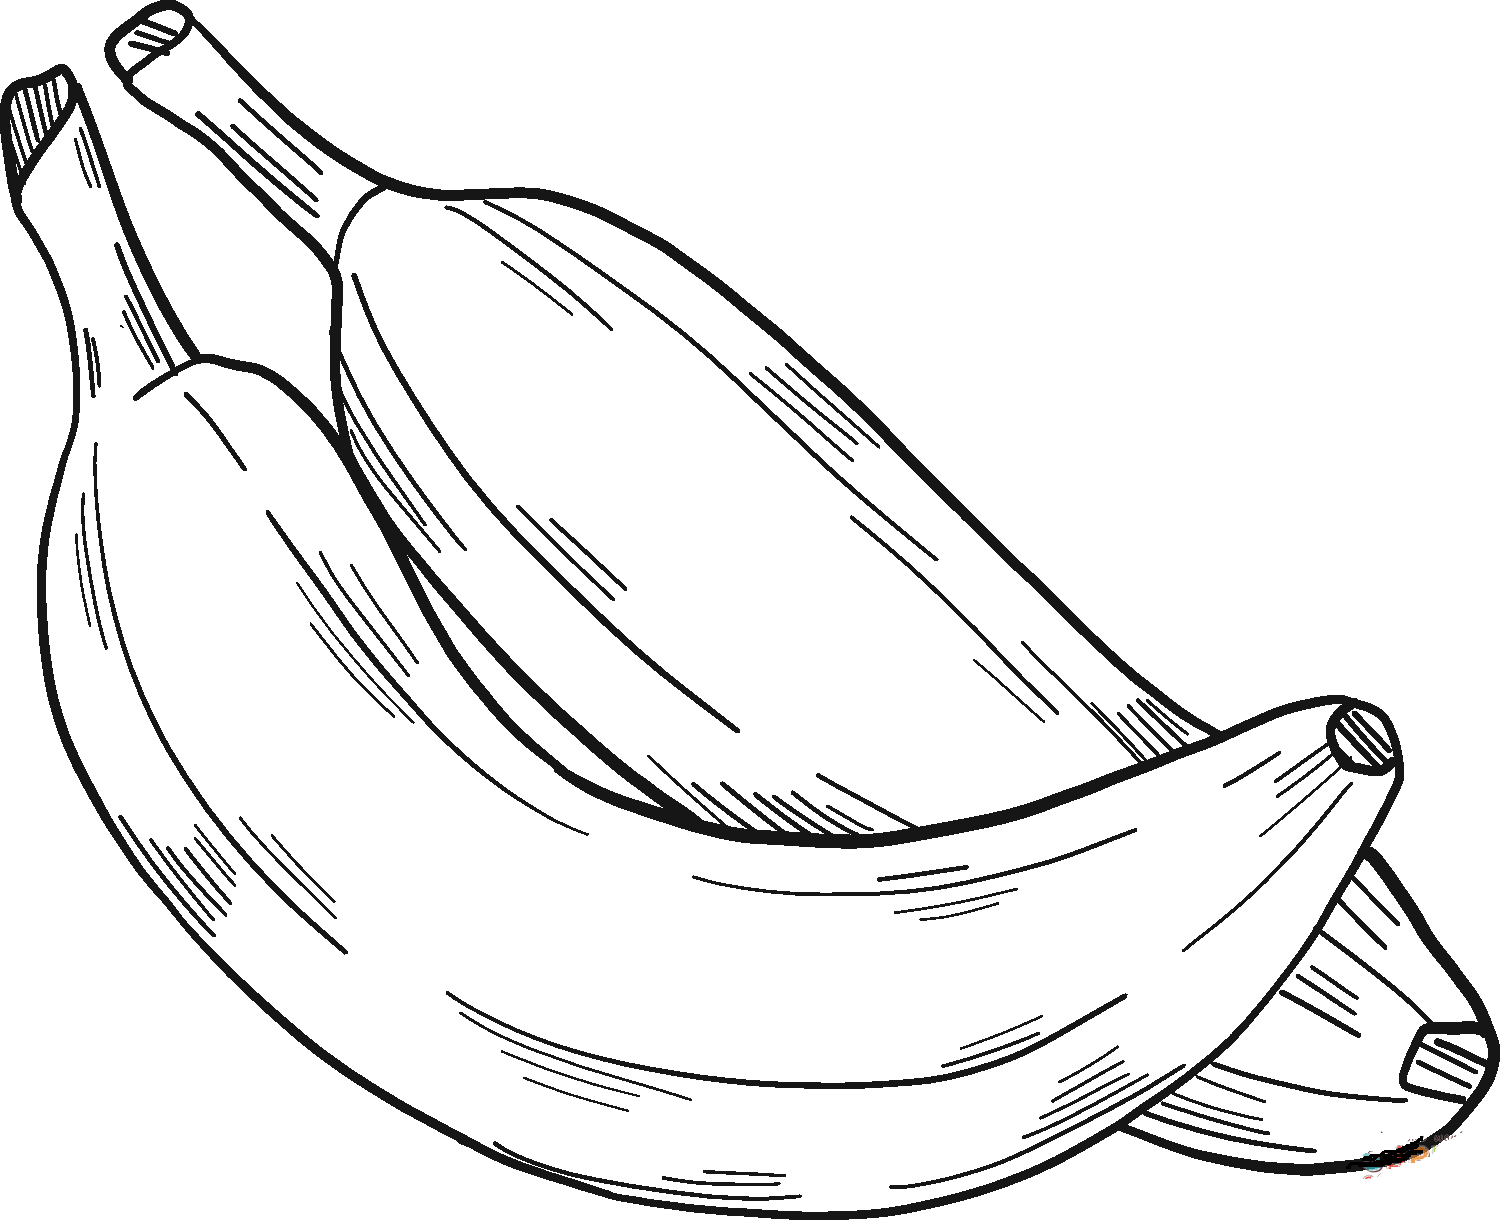 Two bananas Coloring Page